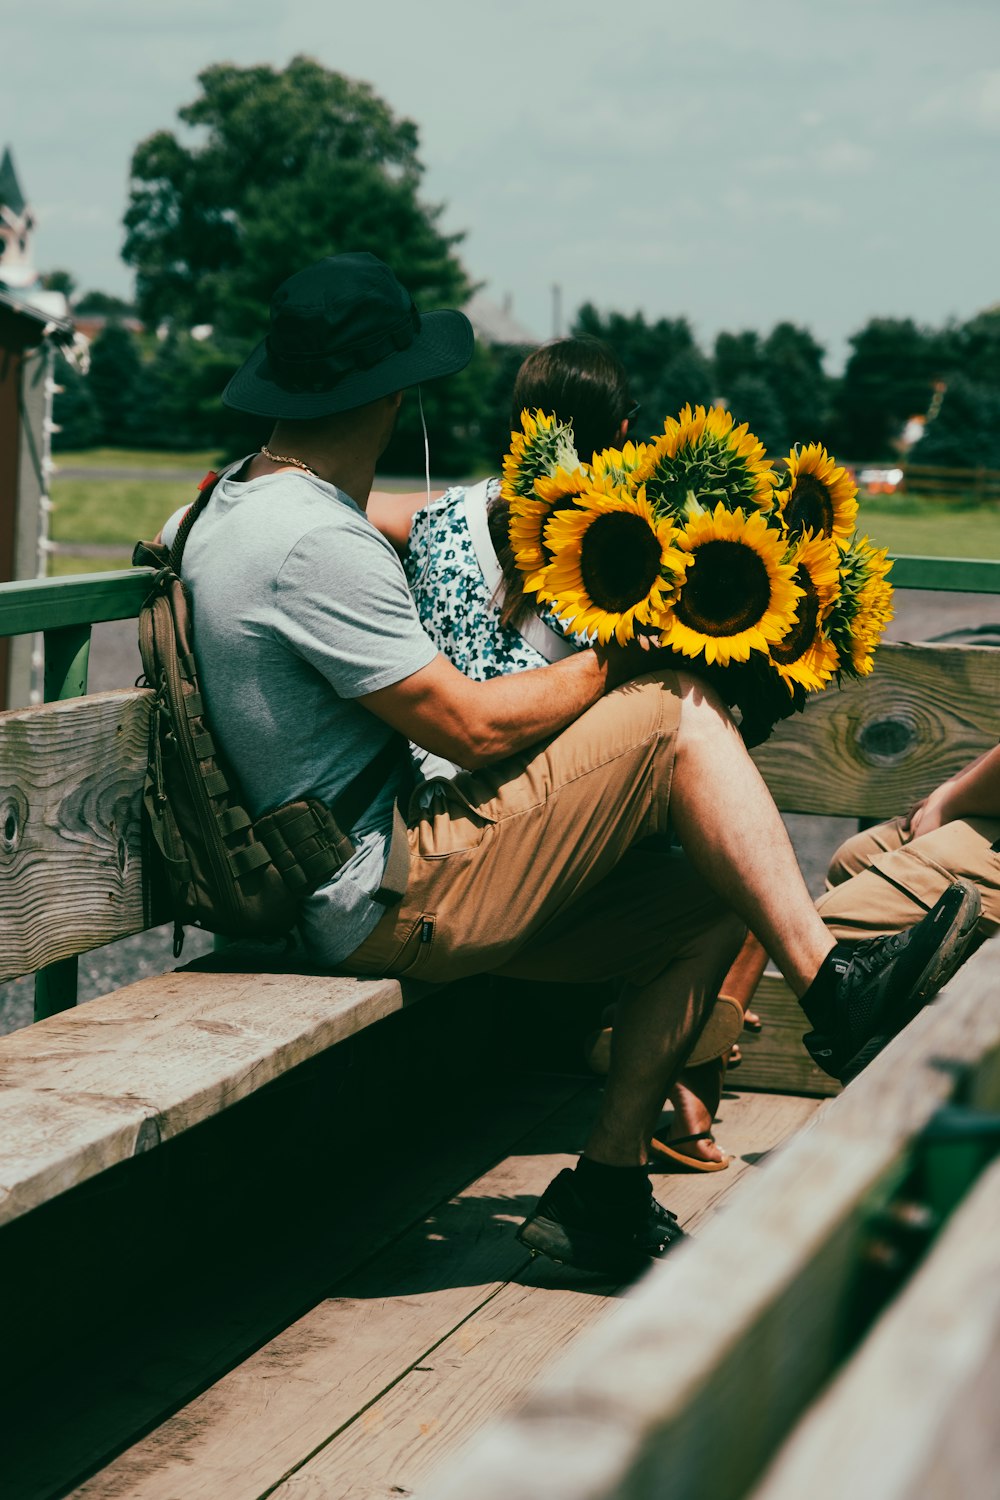 a man and woman sitting on a bench with a sunflower